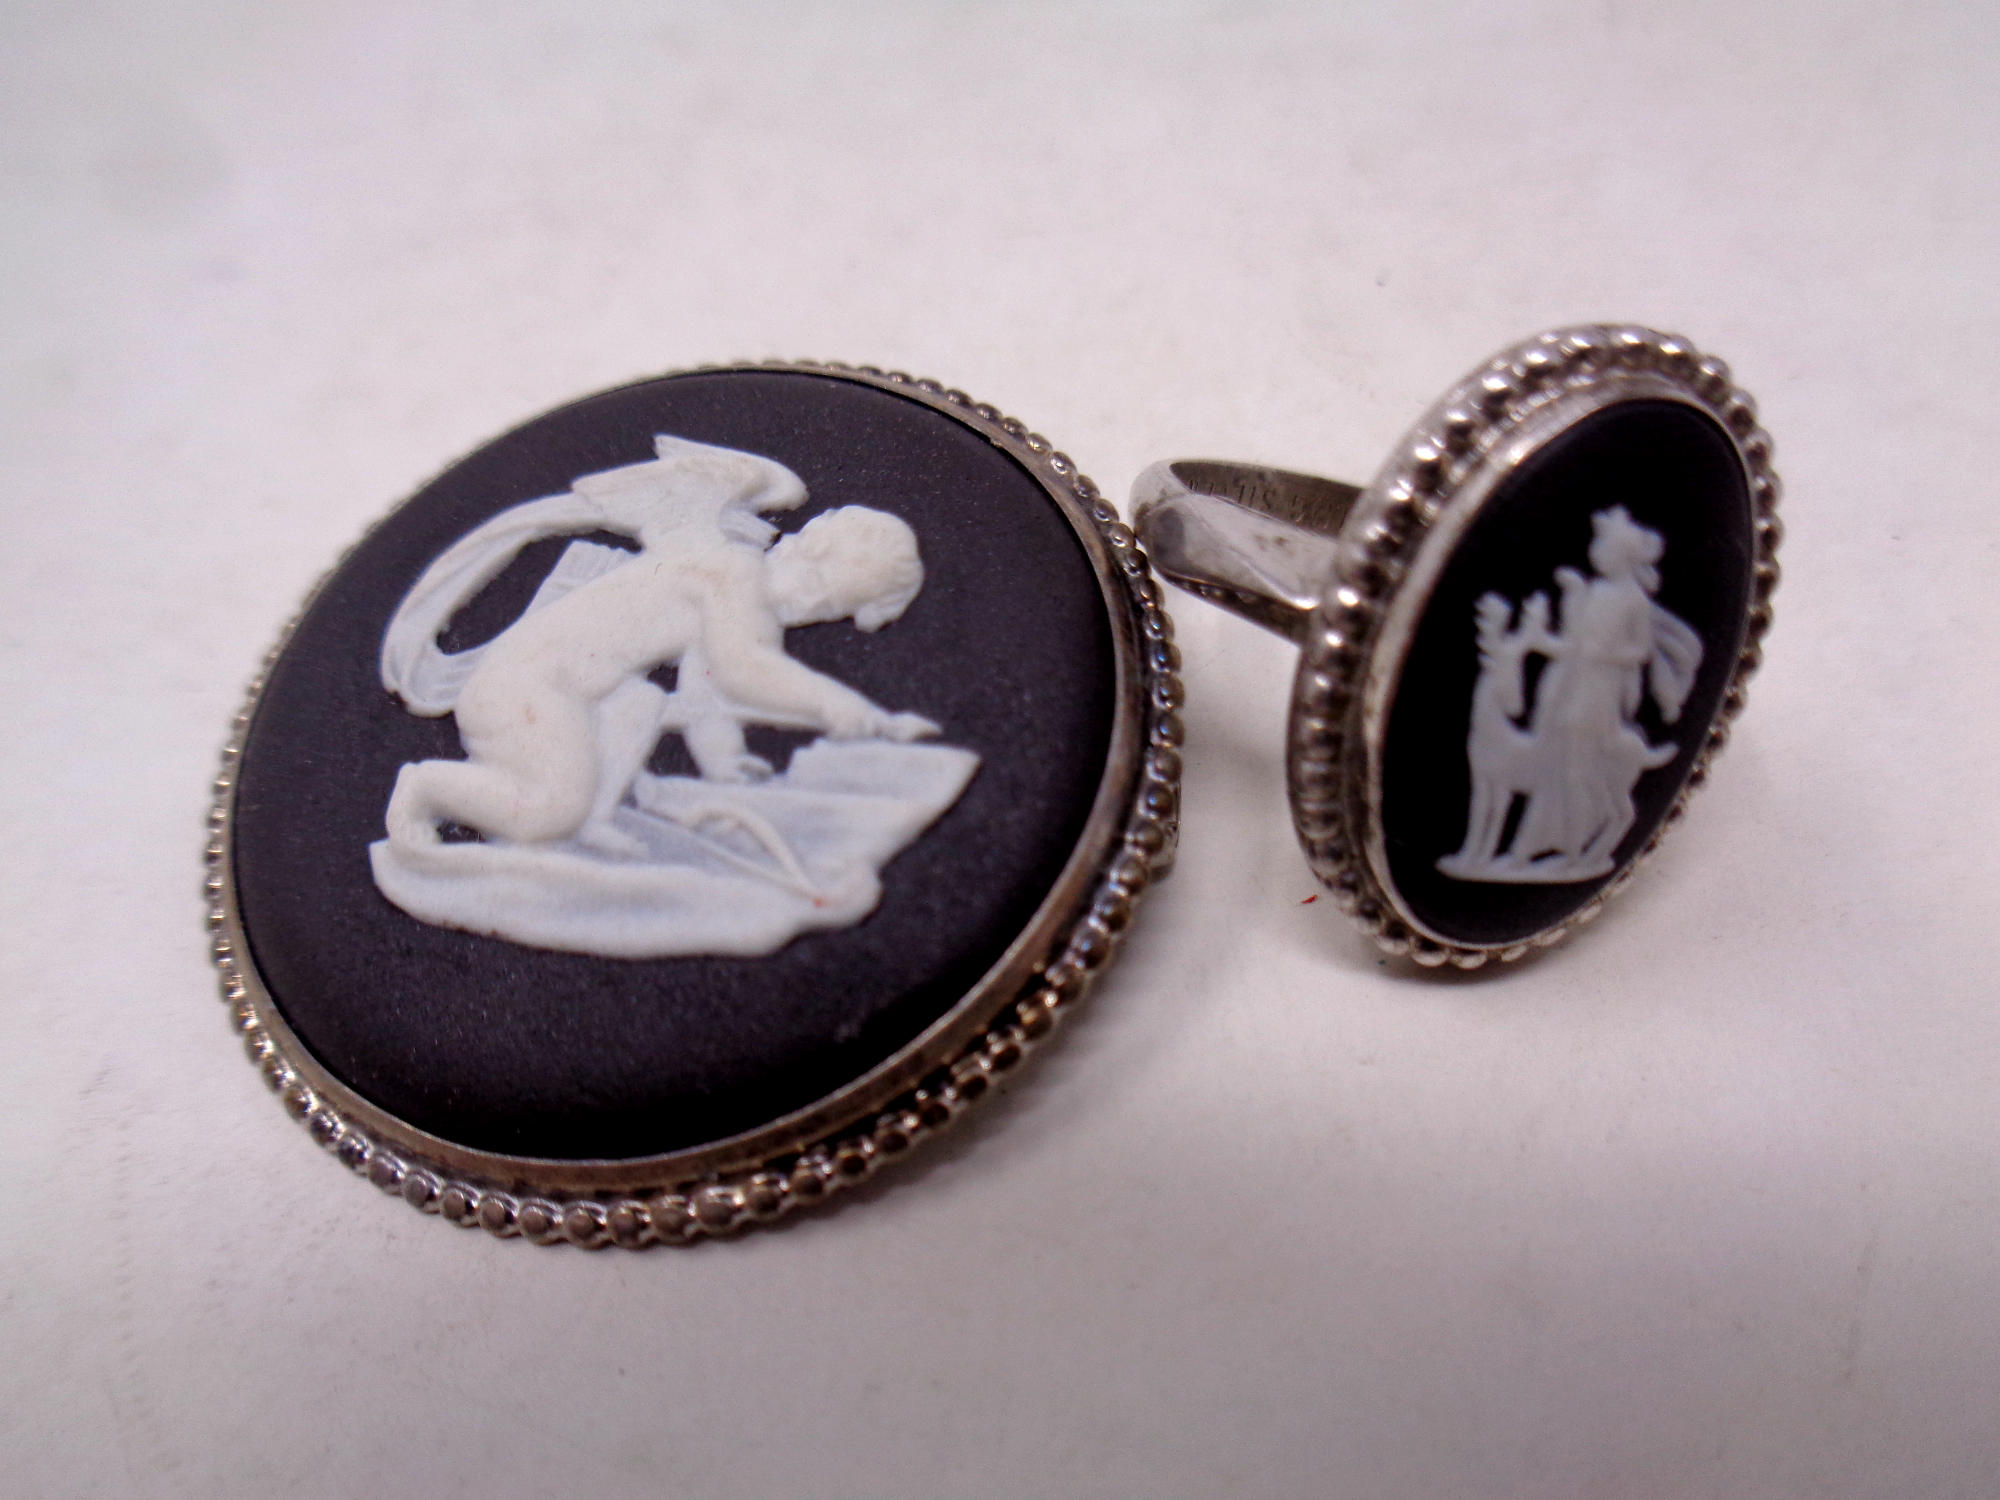 Two black Wedgwood pieces of jewellery - brooch and a ring